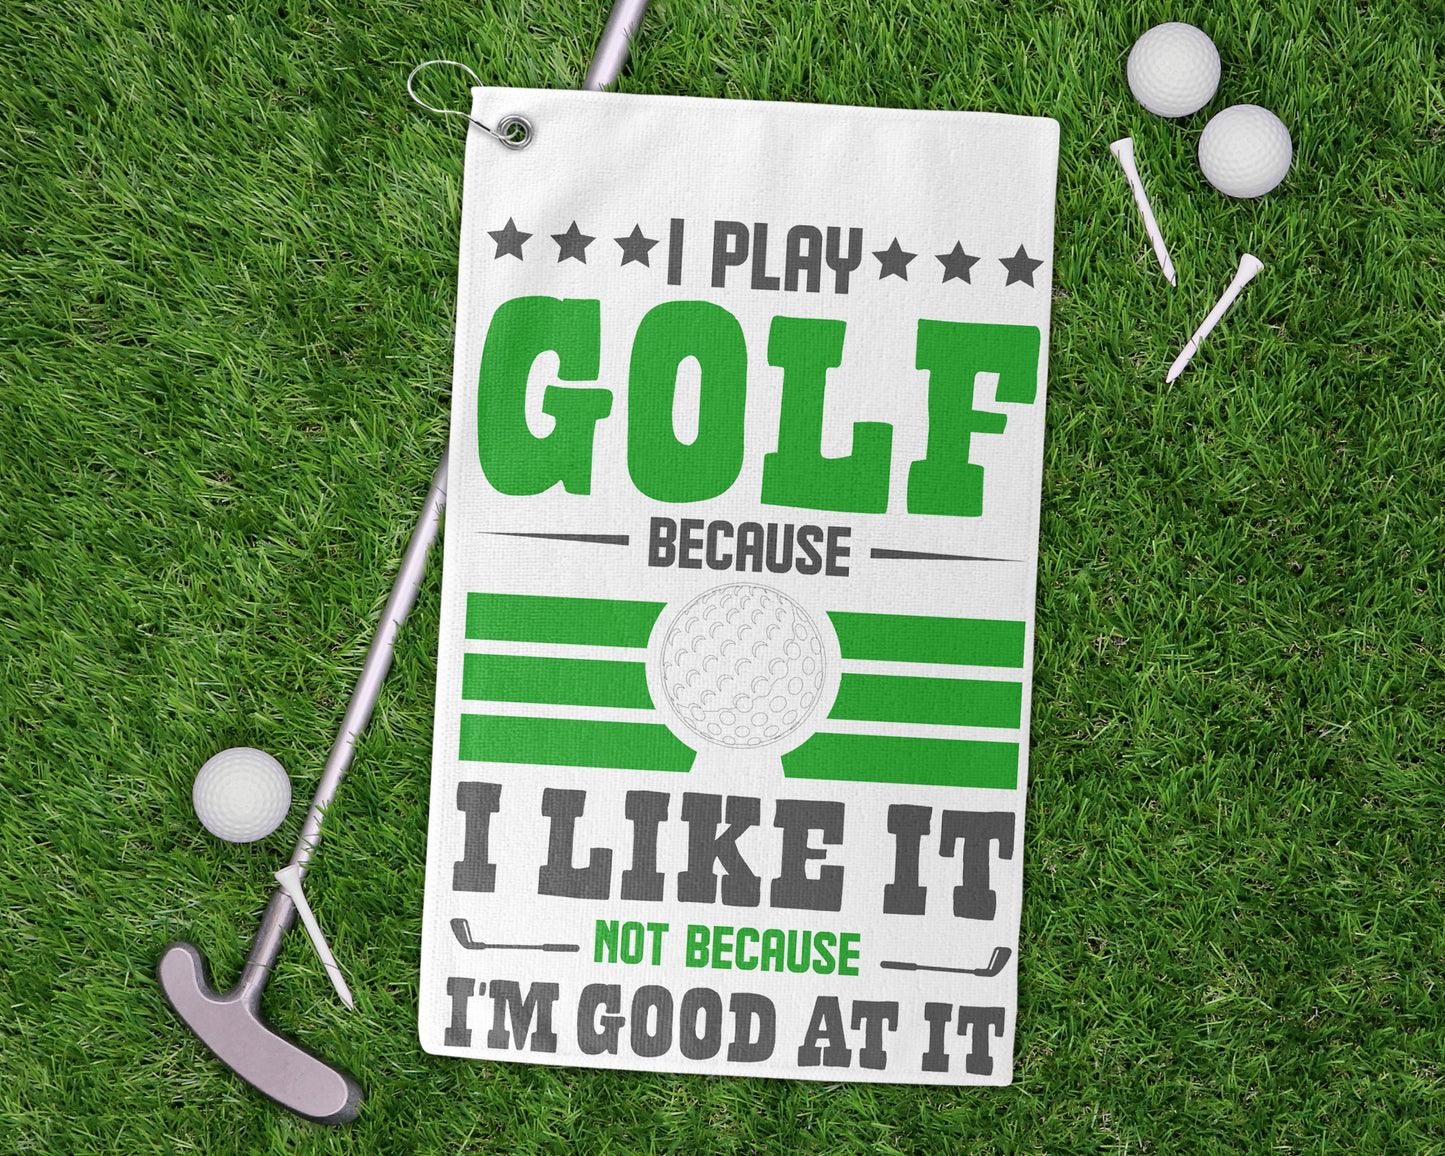 I Play Golf Because I Like It (Not Because I'm Good At It)